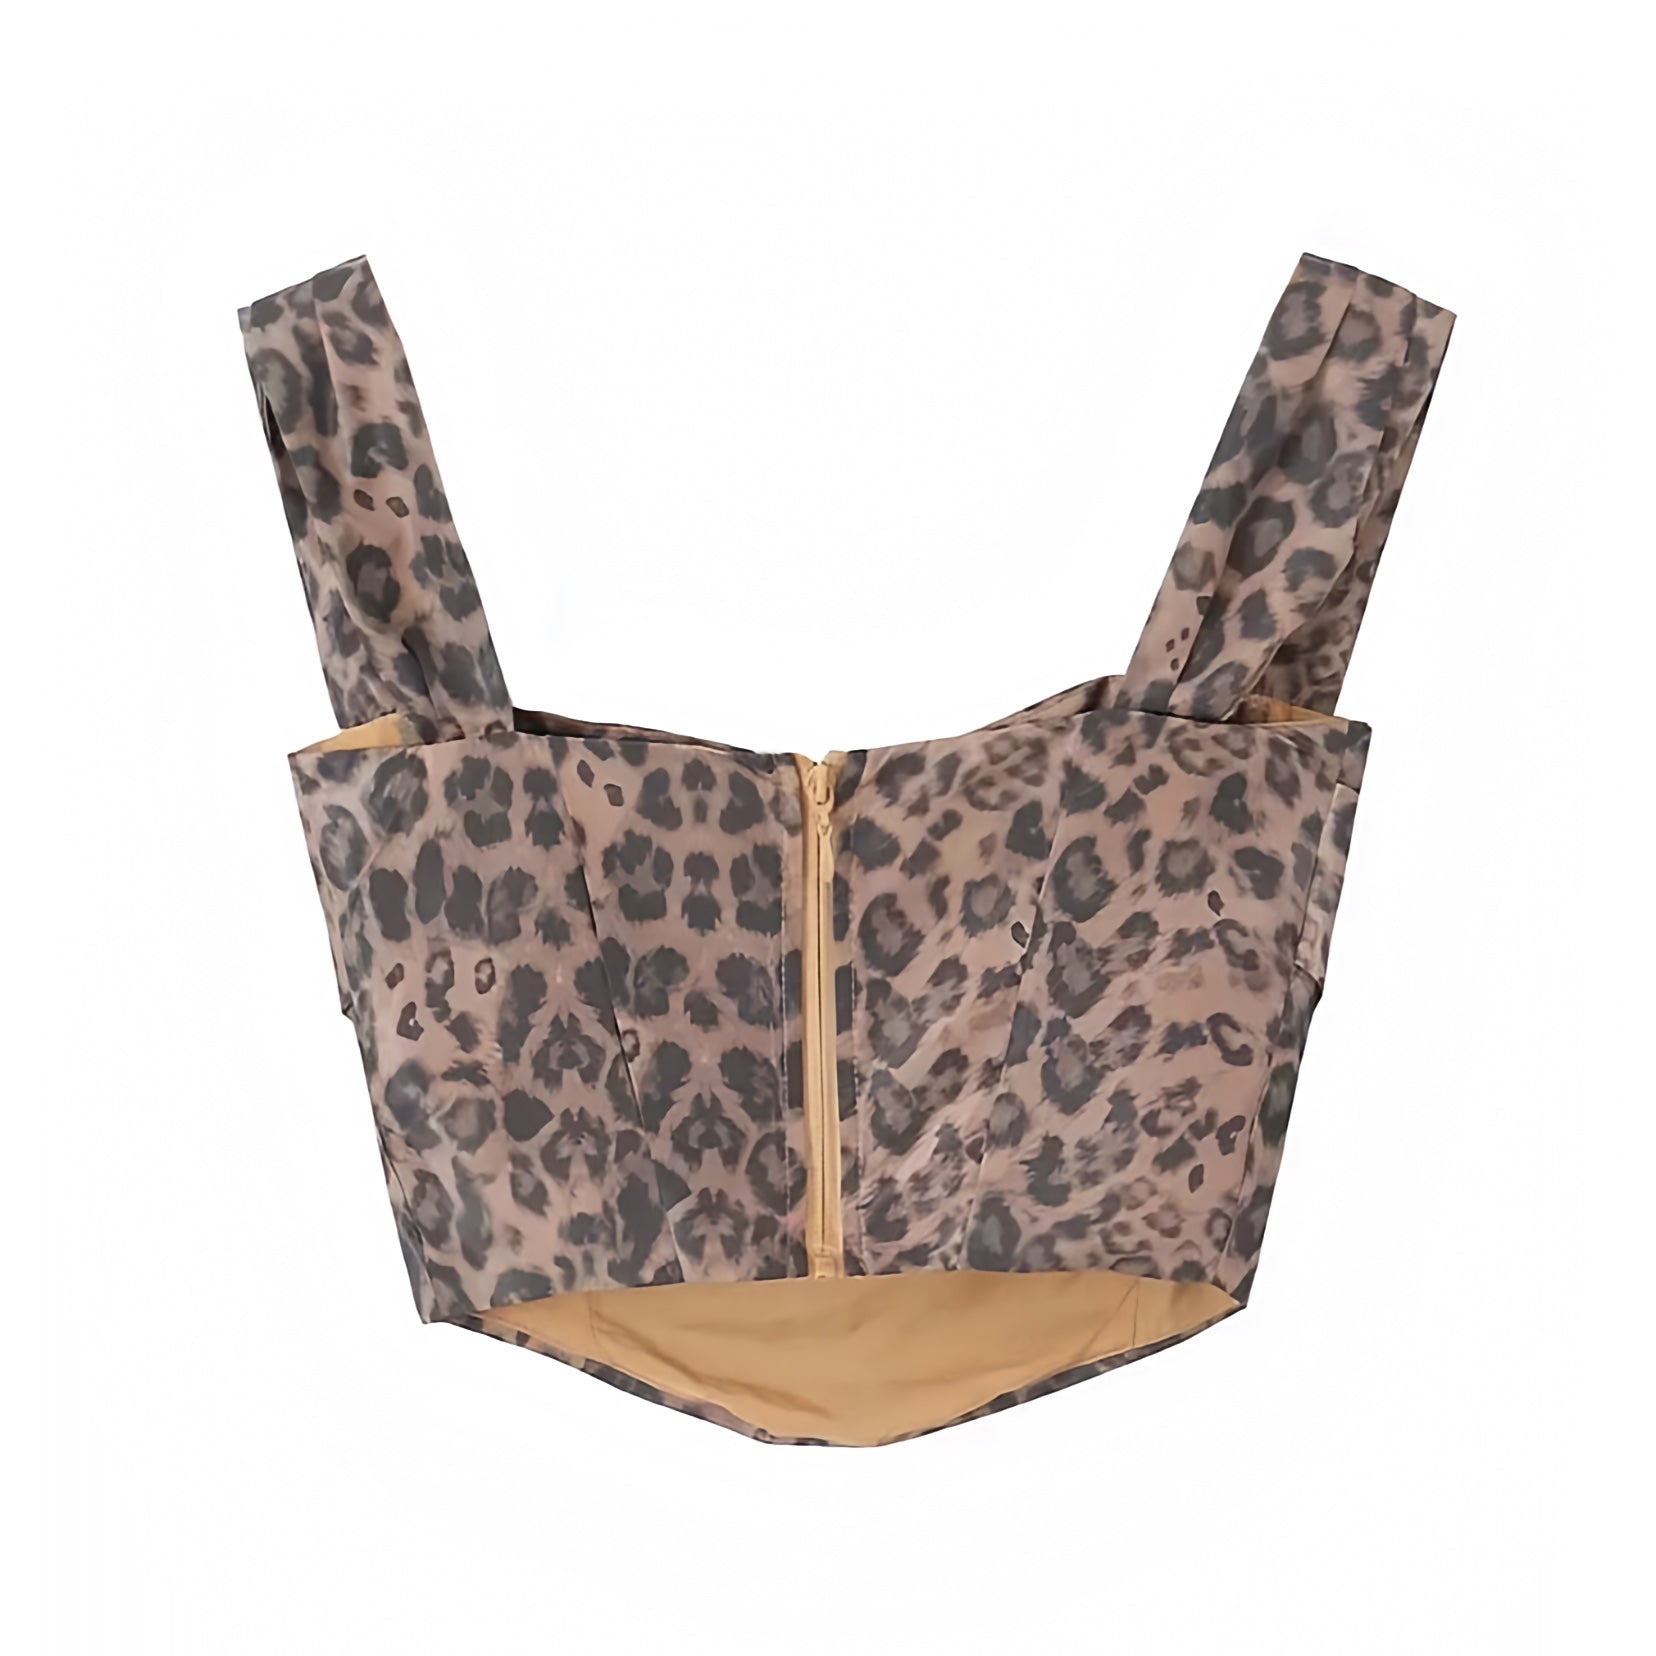 leopard-cheetah-animal-print-patterned-brown-black-multi-color-slim-fit-corset-bustier-ruched-sleeveless-spaghetti-strap-cami-crop-tank-top-blouse-women-ladies-chic-trendy-spring-2024-summer-casual-classy-feminine-party-date-night-out-sexy-club-wear-y2k-exotic-tropical-vacation-beach-wear-zara-revolve-white-fox-princess-polly-edikted-emminol-reformation-brandy-melville